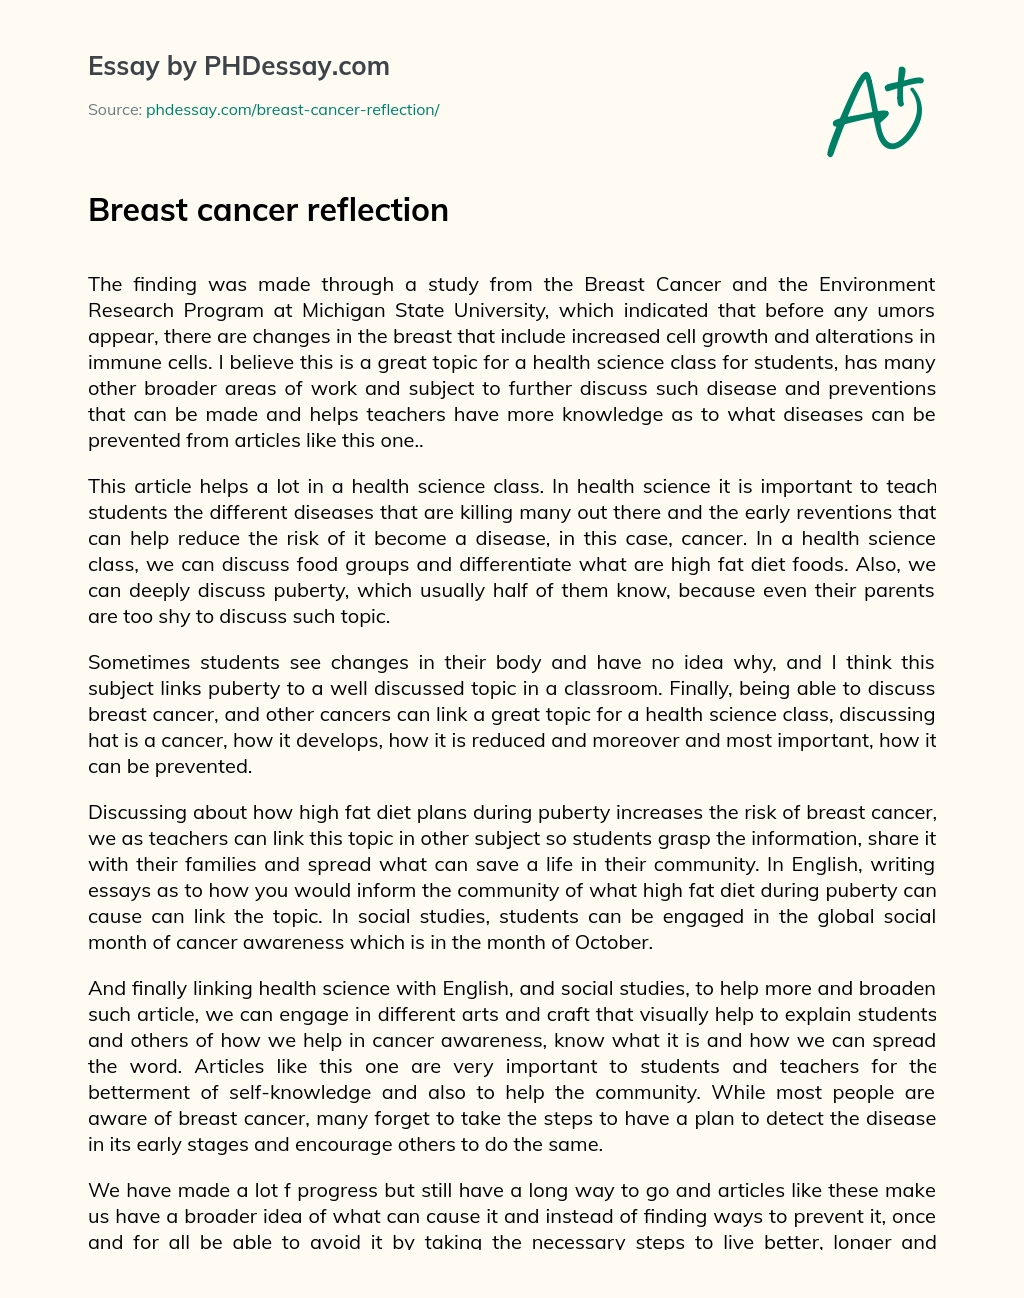 Breast cancer reflection essay